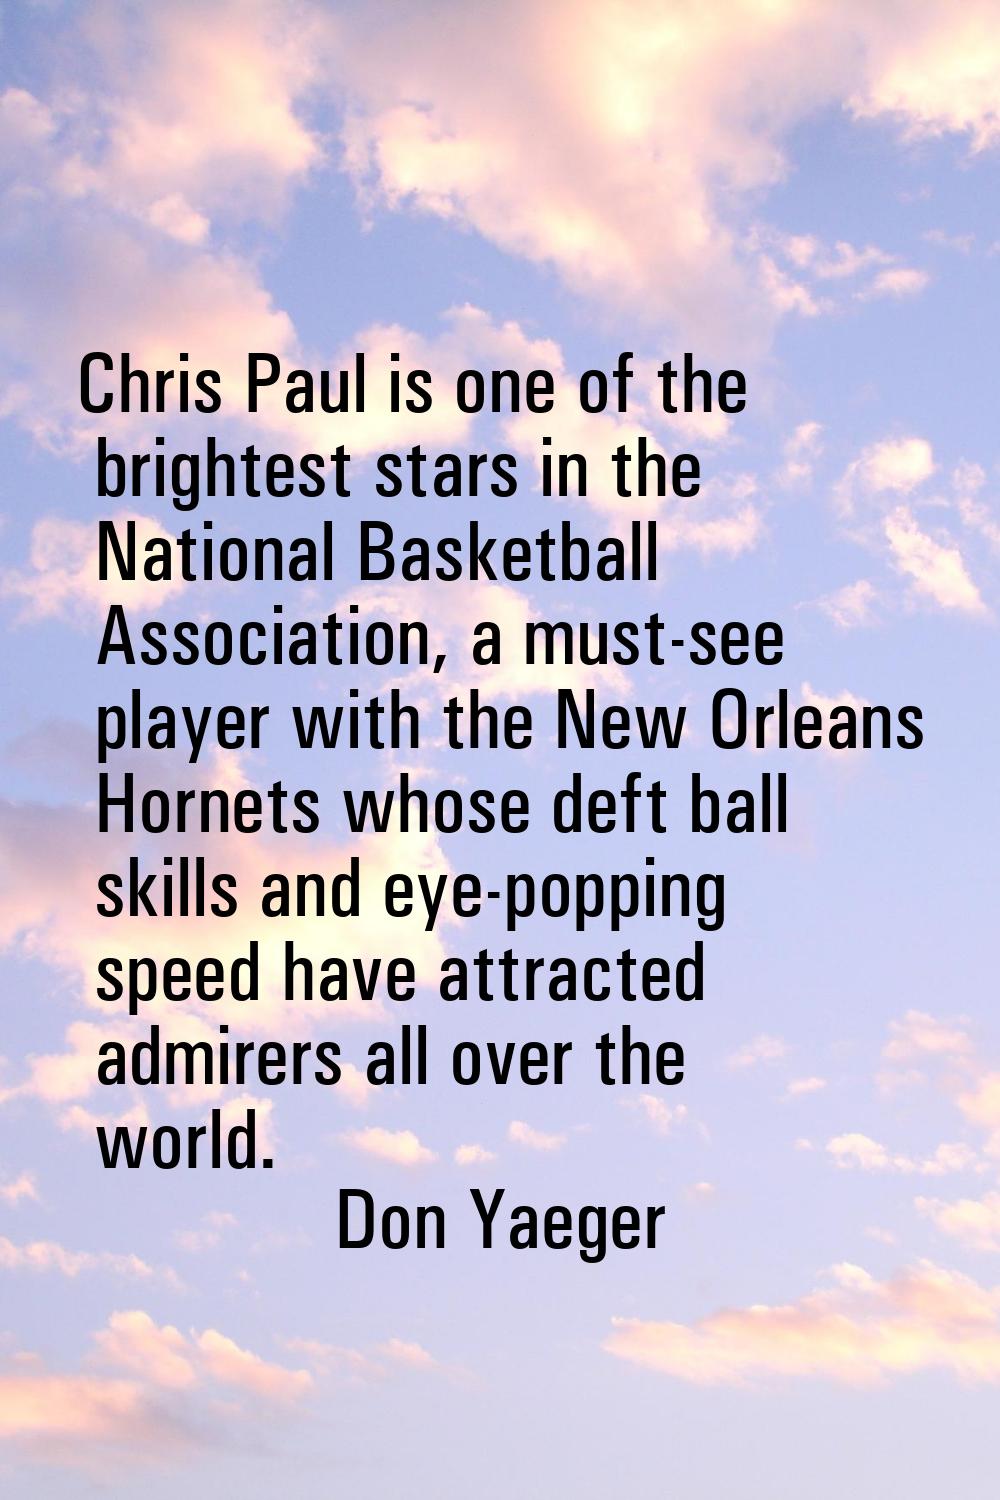 Chris Paul is one of the brightest stars in the National Basketball Association, a must-see player 